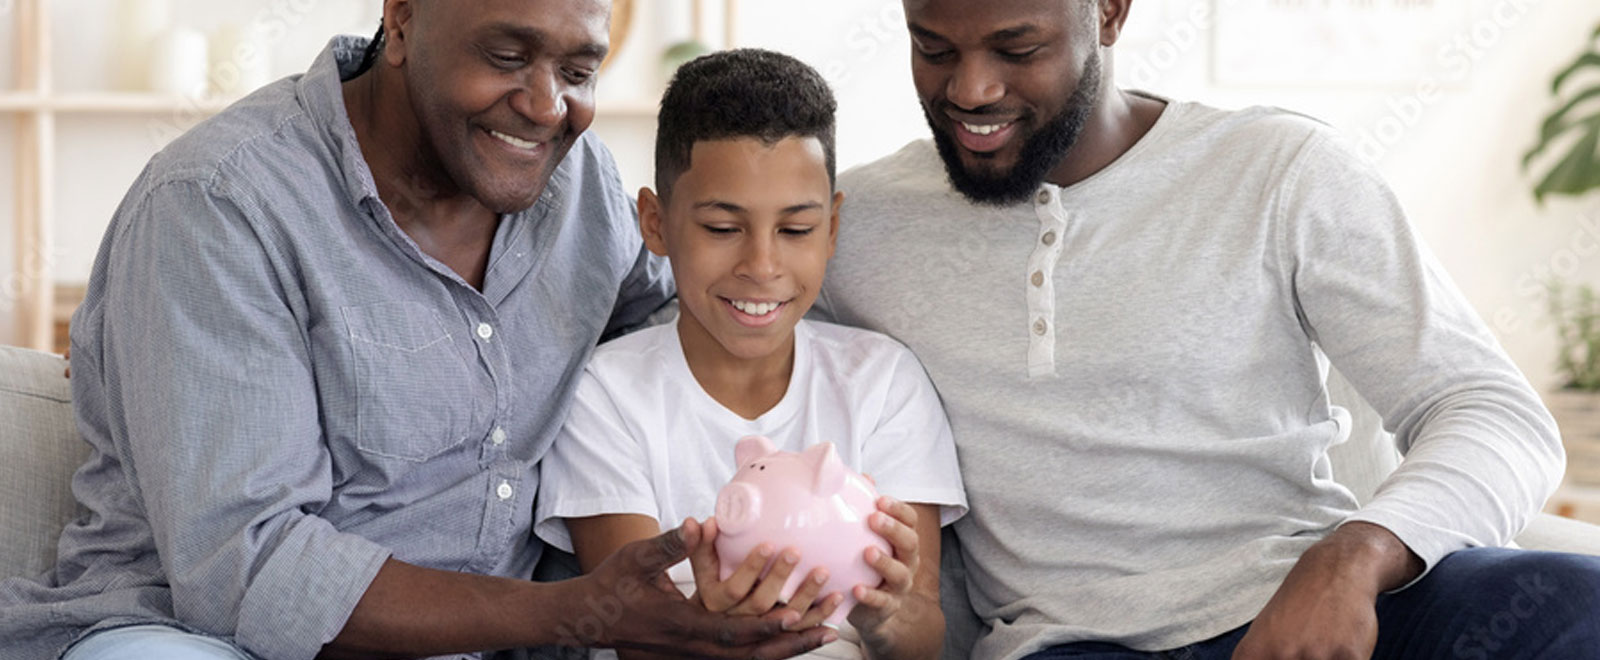 A young boy in between his dad and grandfather holding a piggy bank.